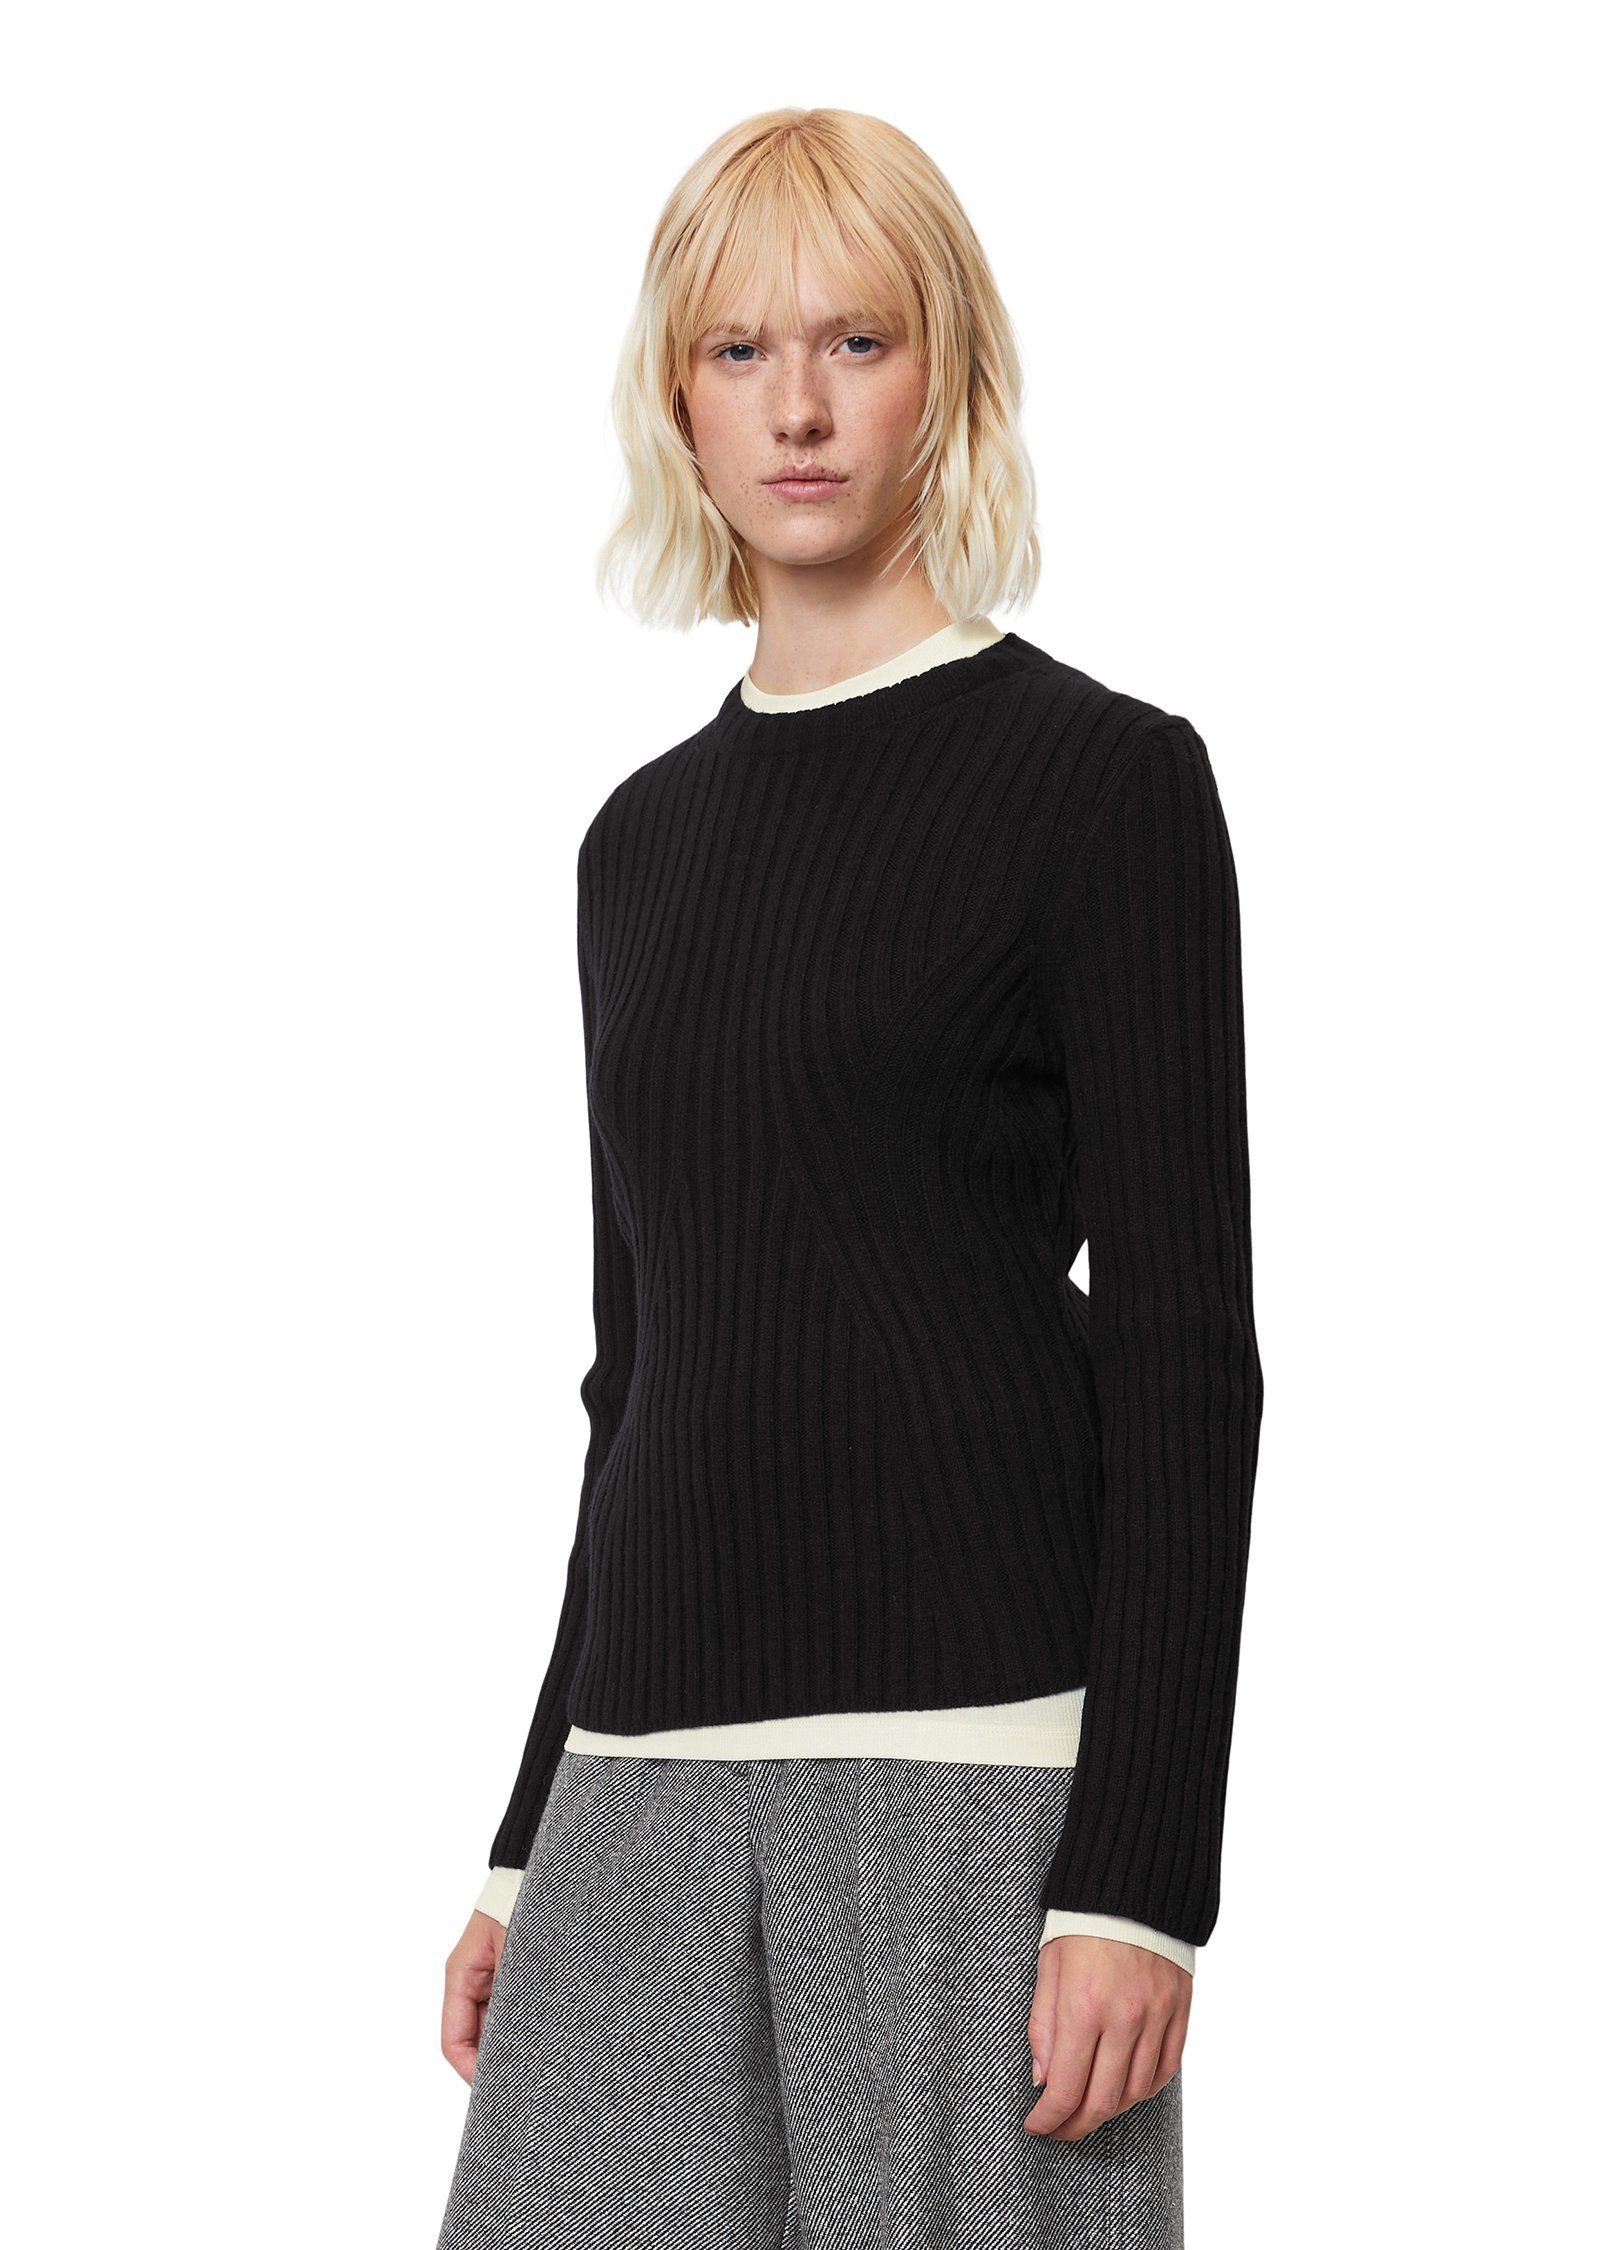 Marc O'Polo Strickpullover mit Fully fashioned Details schwarz